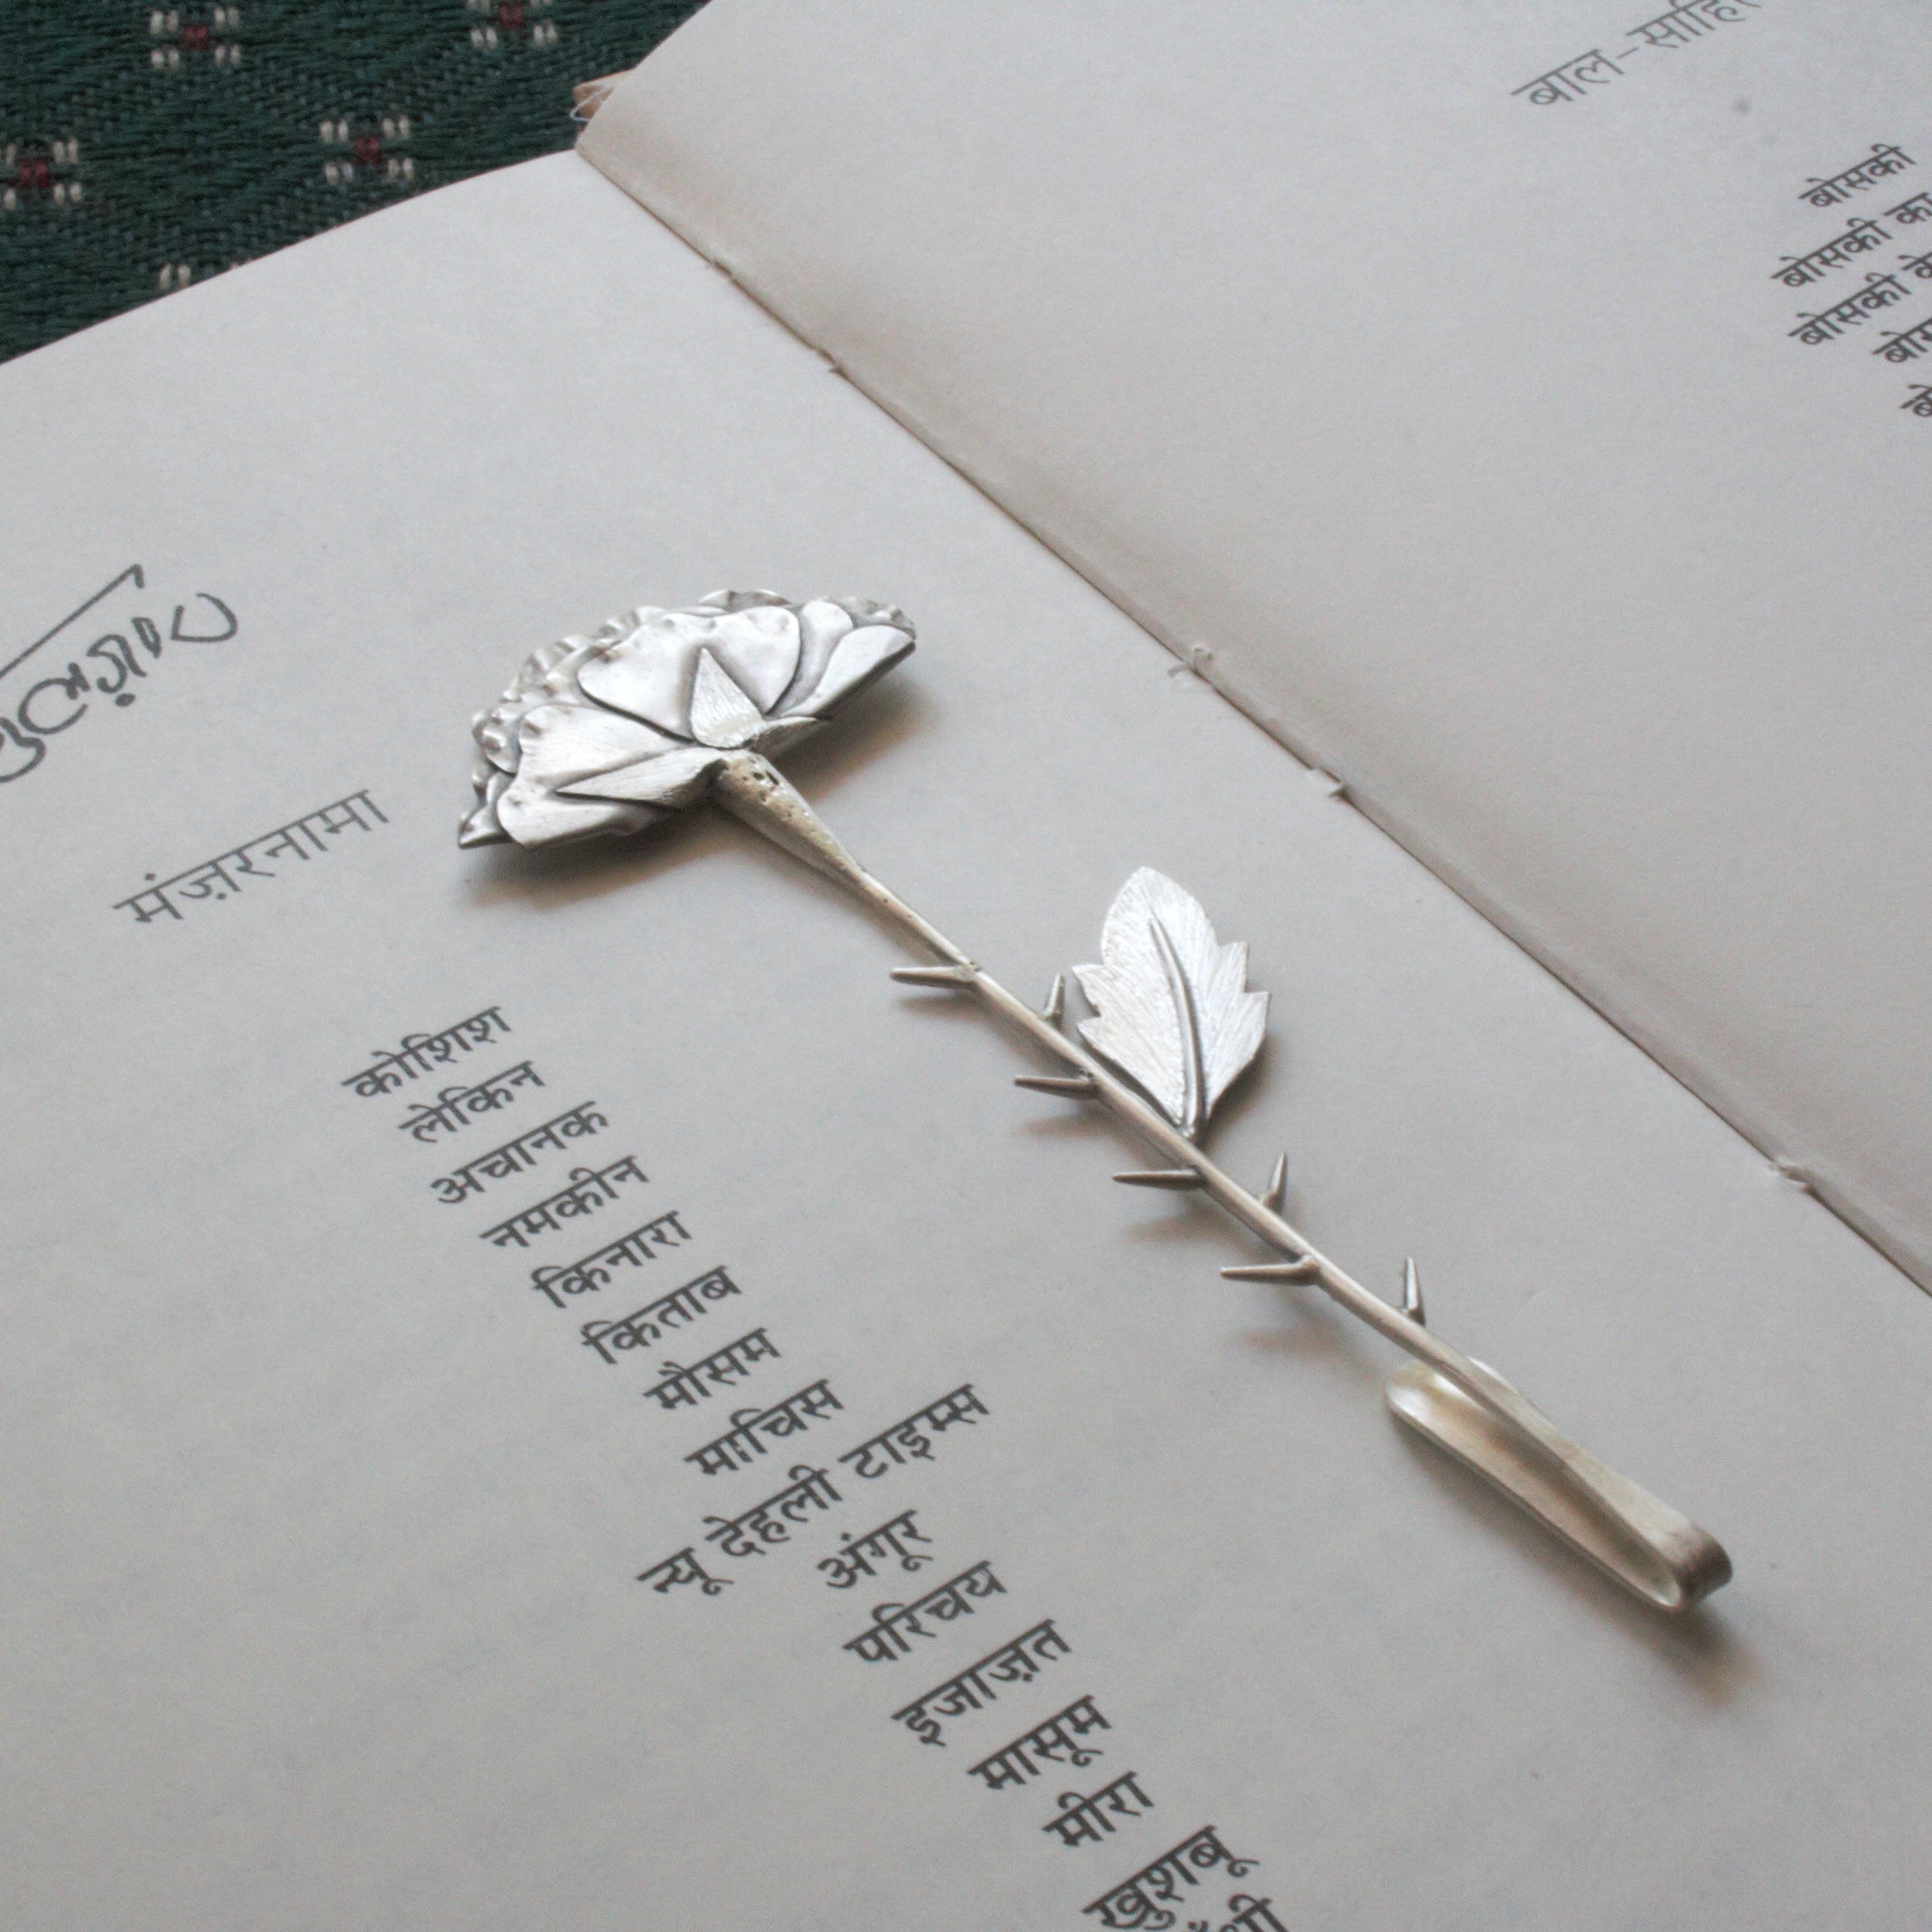 How to choose a good bookmark for gifting?